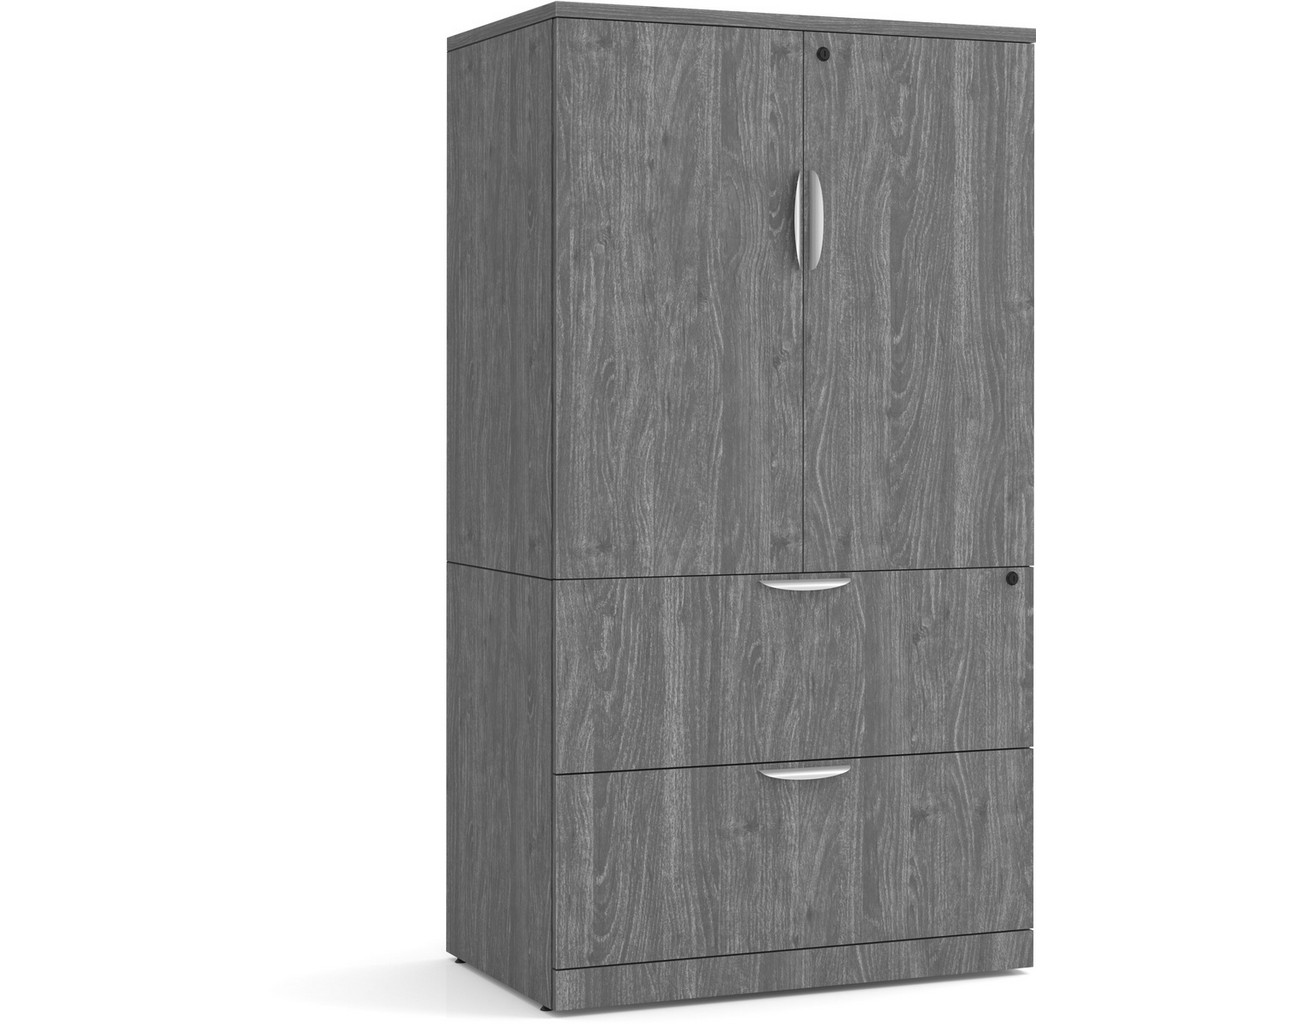 Locking Storage Cabinet and Lateral File Combo Unit – Newport Grey